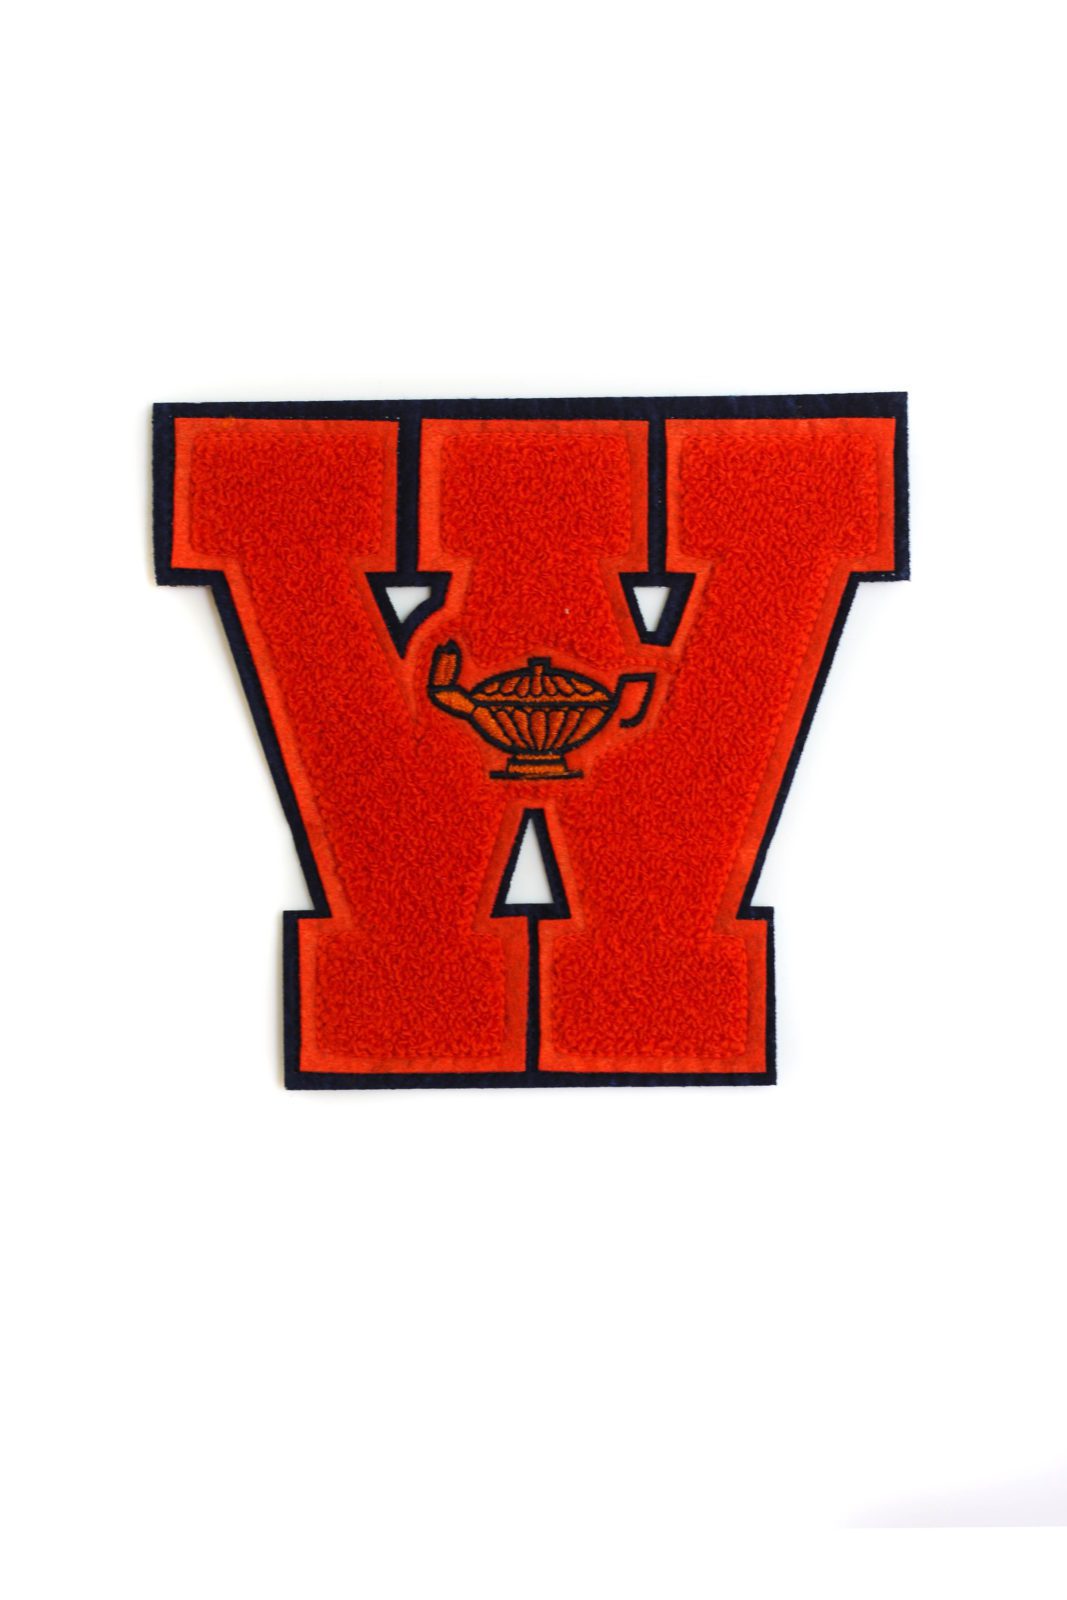 Letter W iron on letterman varsity patches